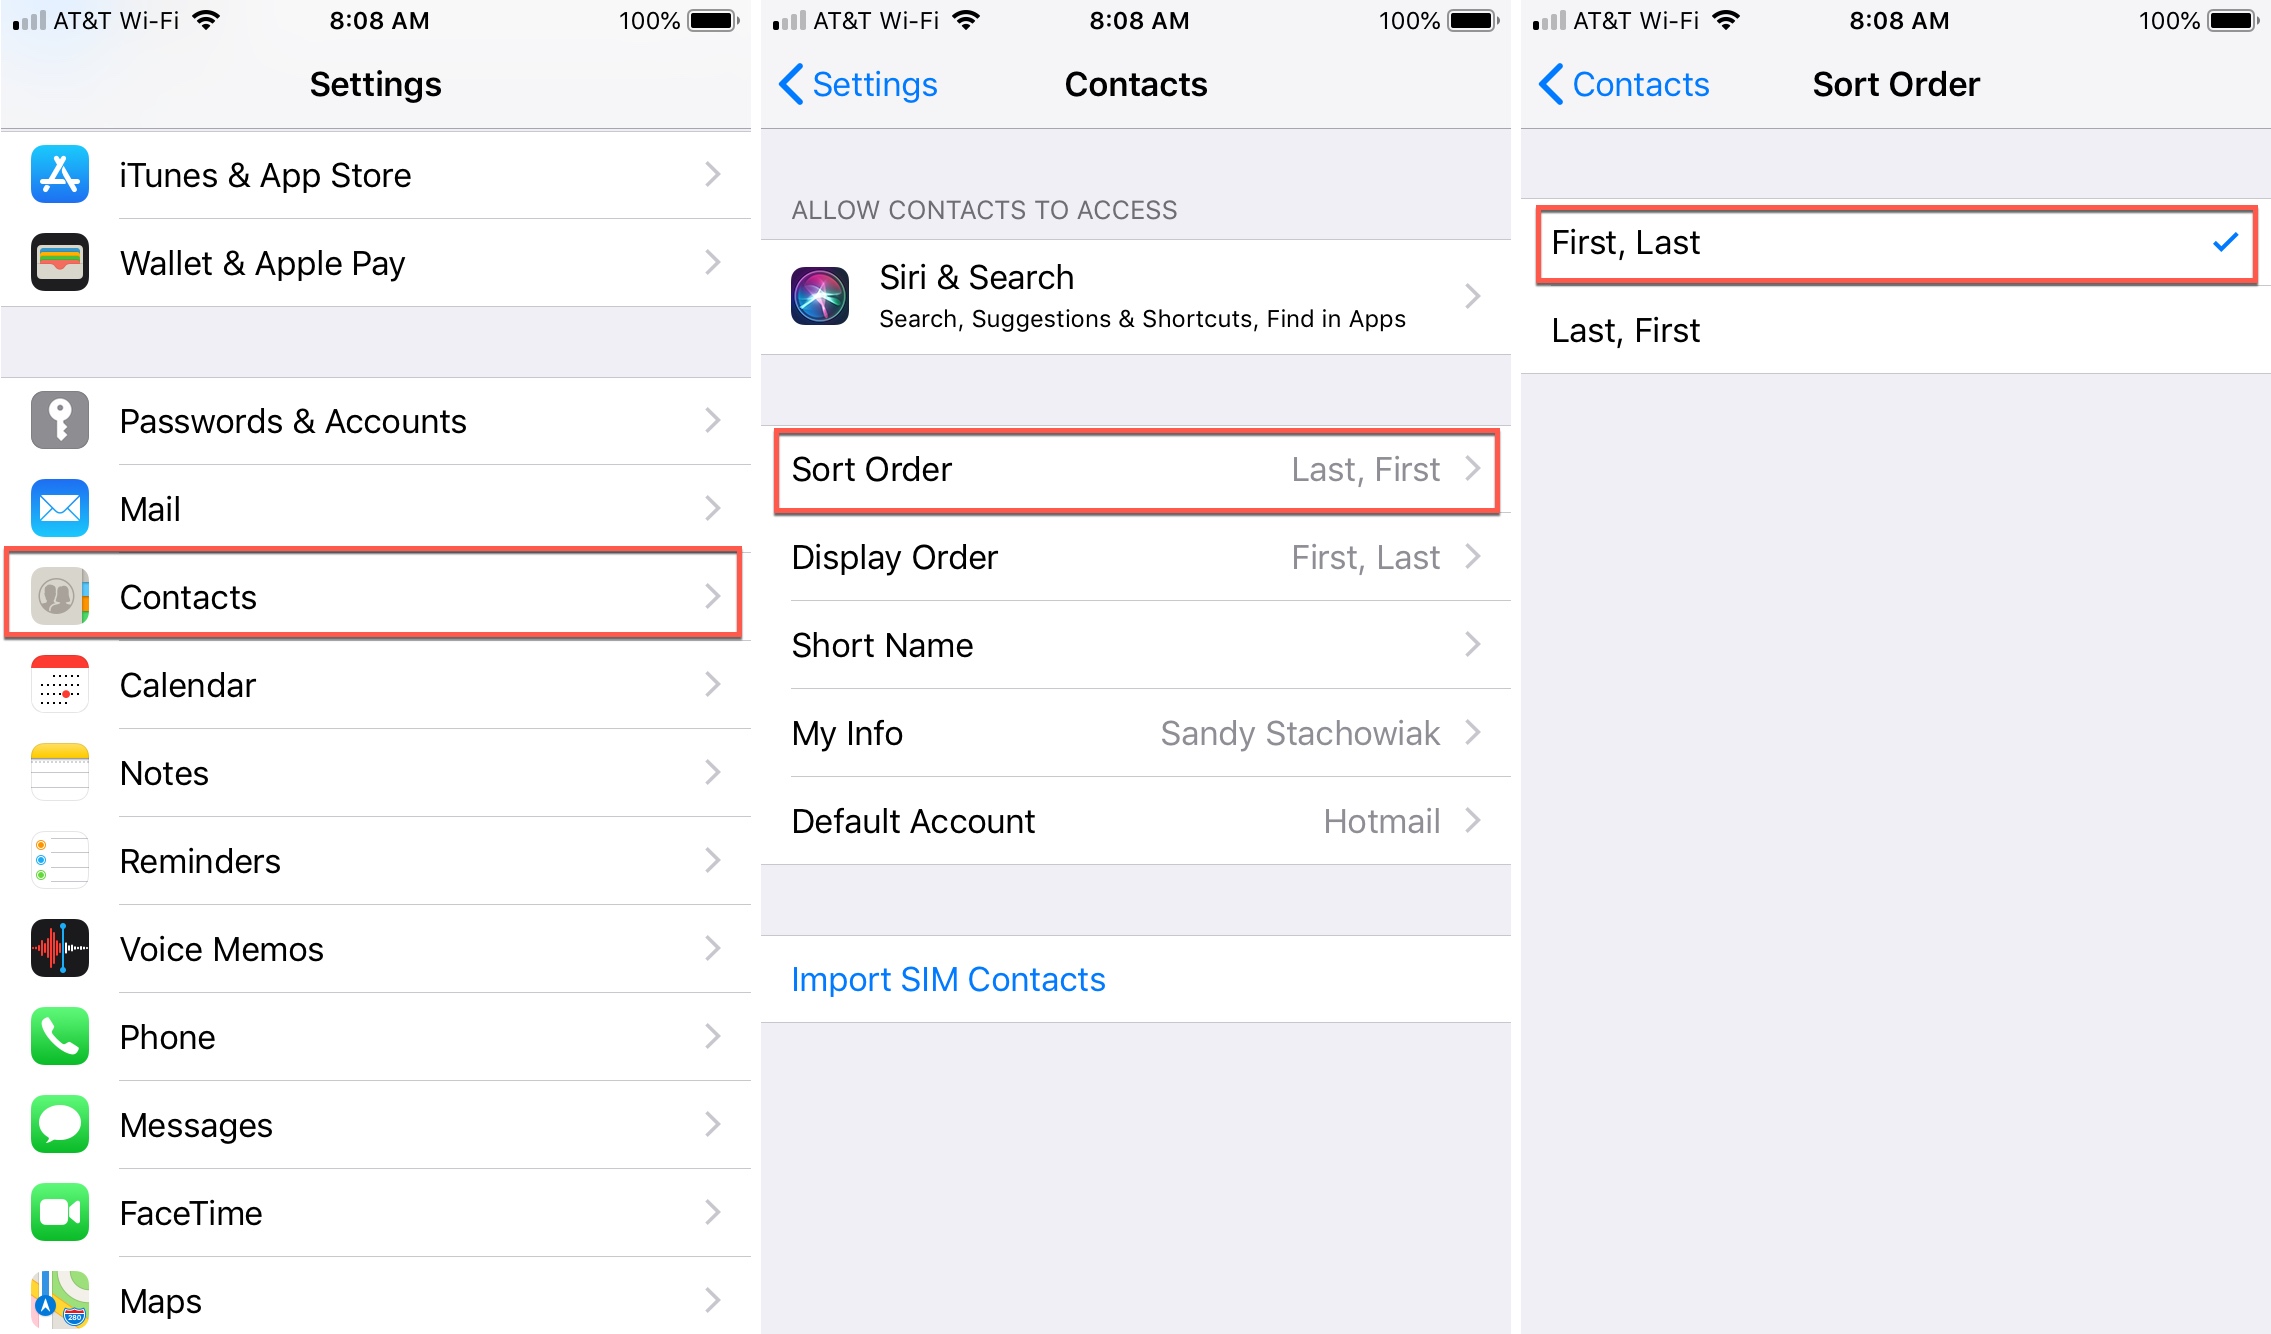 How to sort contacts by first name in Contacts on iPhone, iPad and Mac